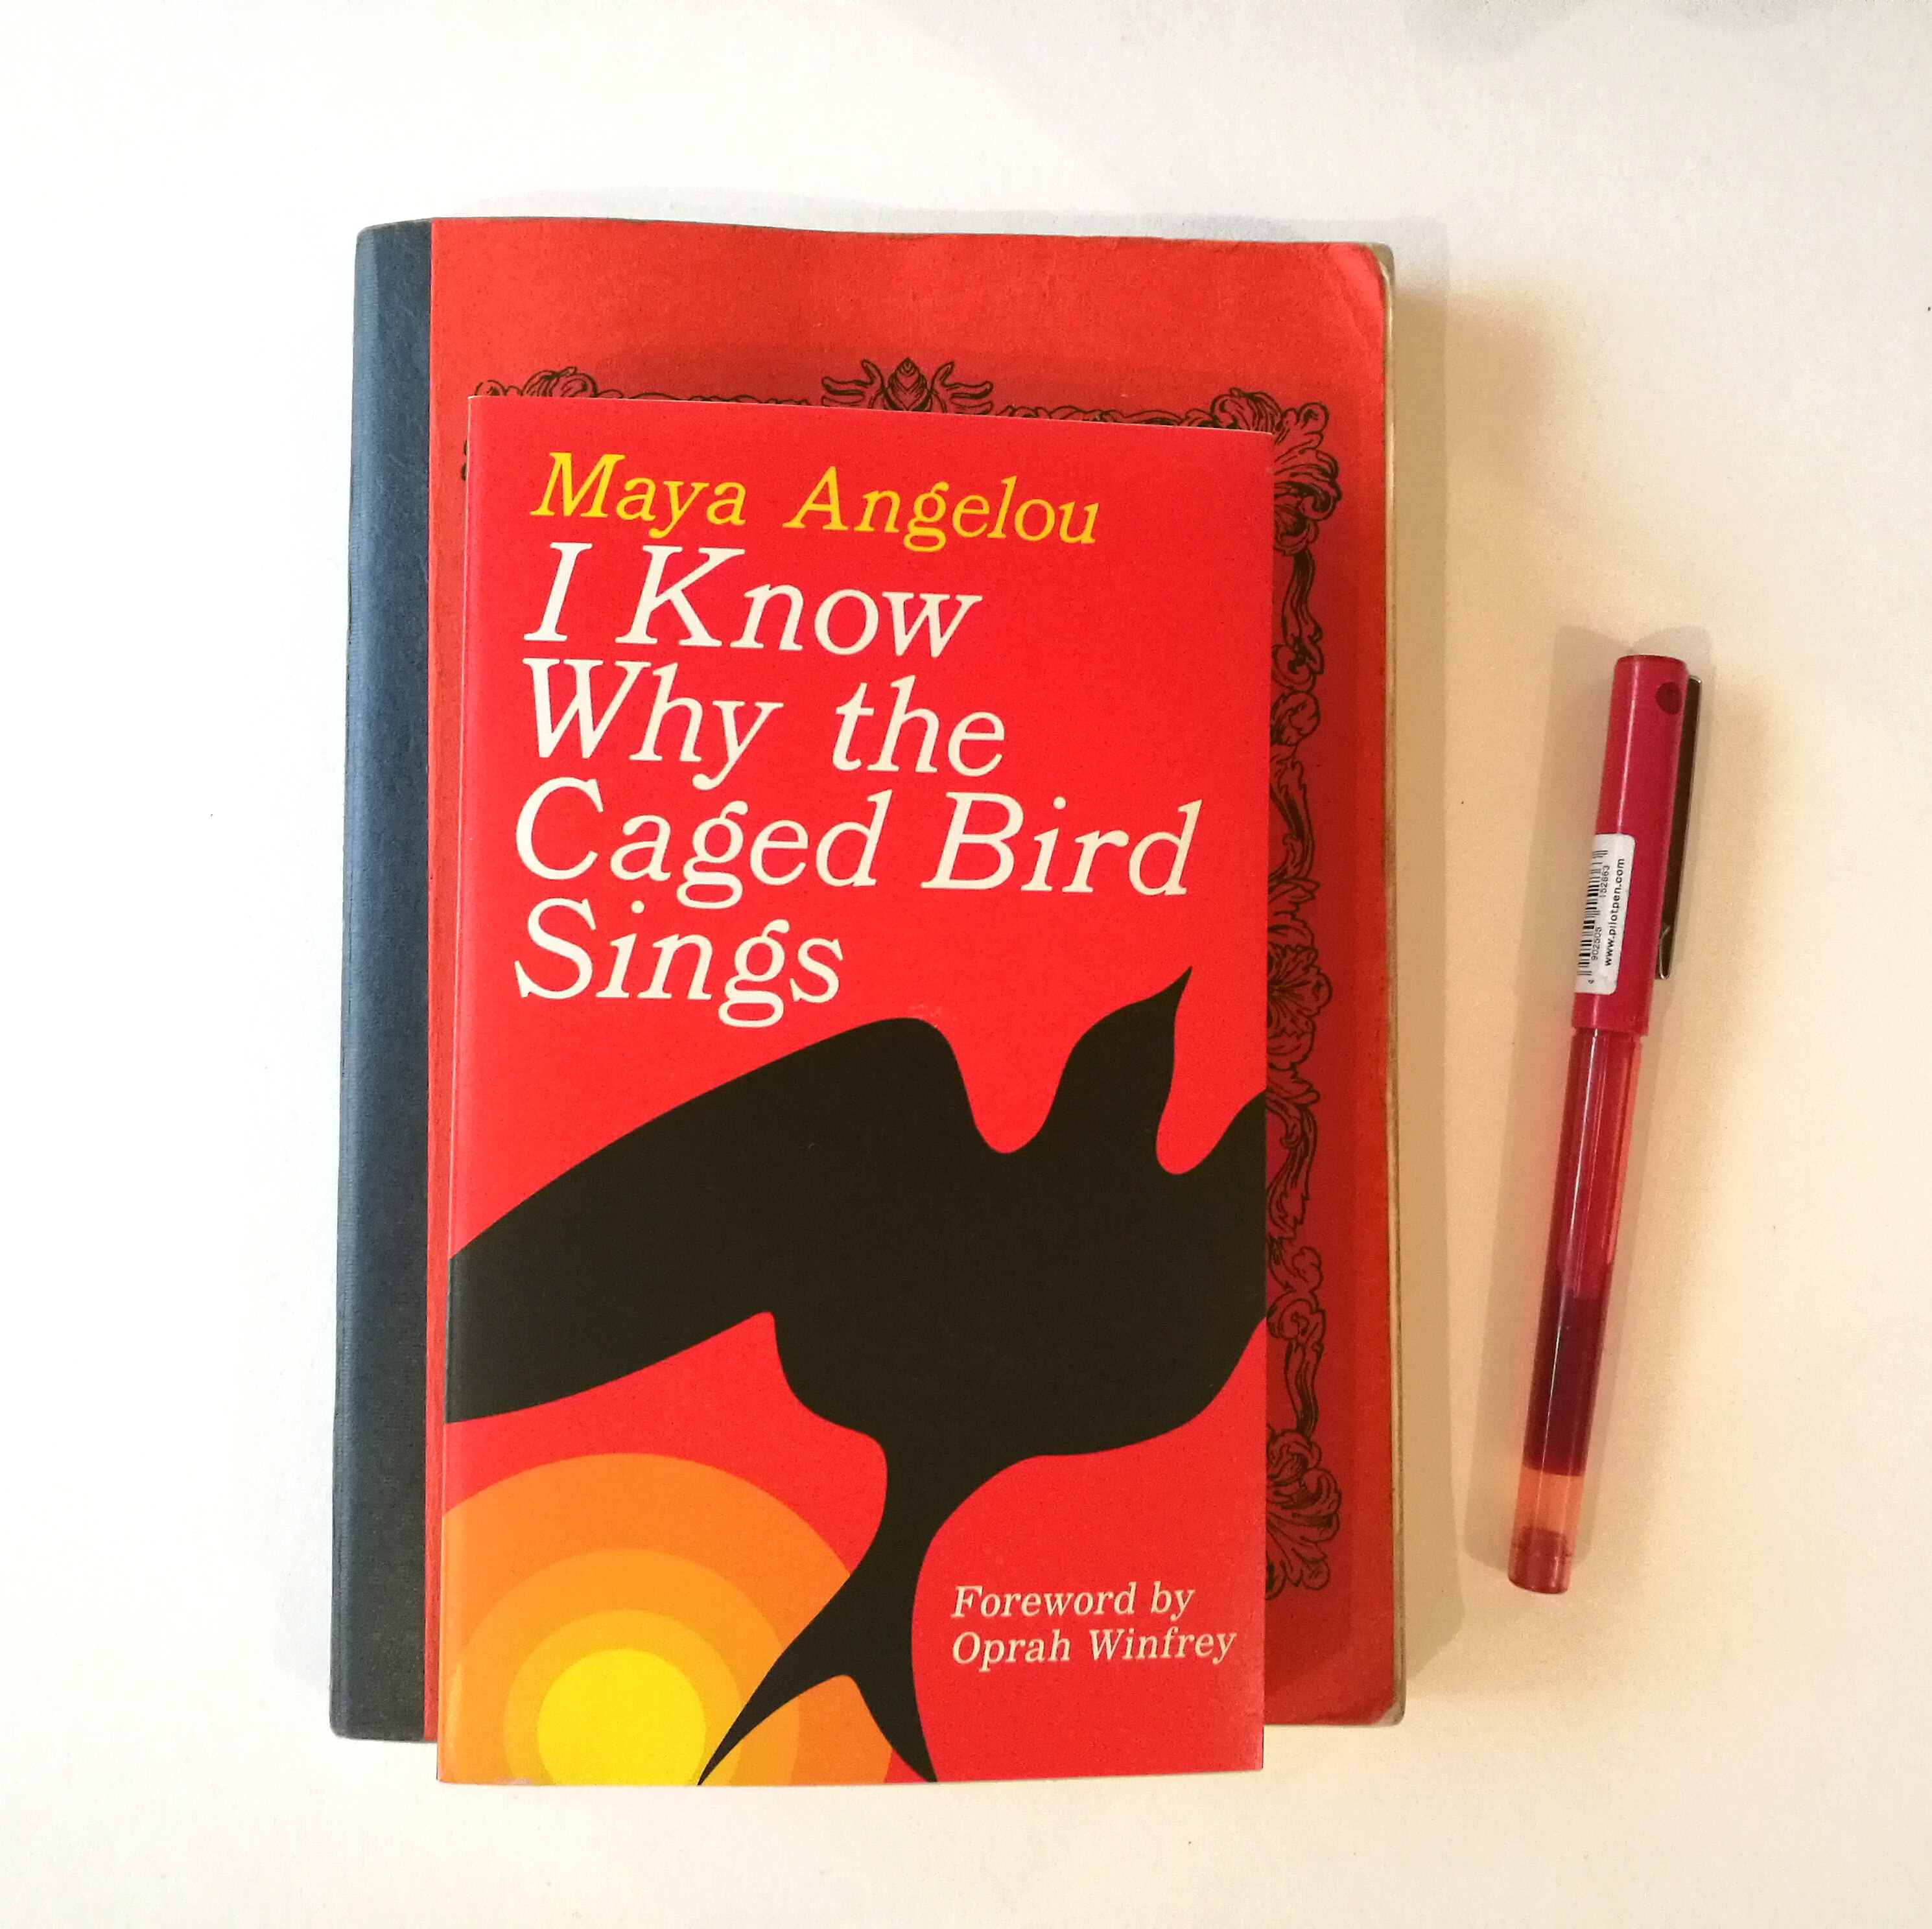 Dive deep into maya angelou's i know why the caged bird sings...